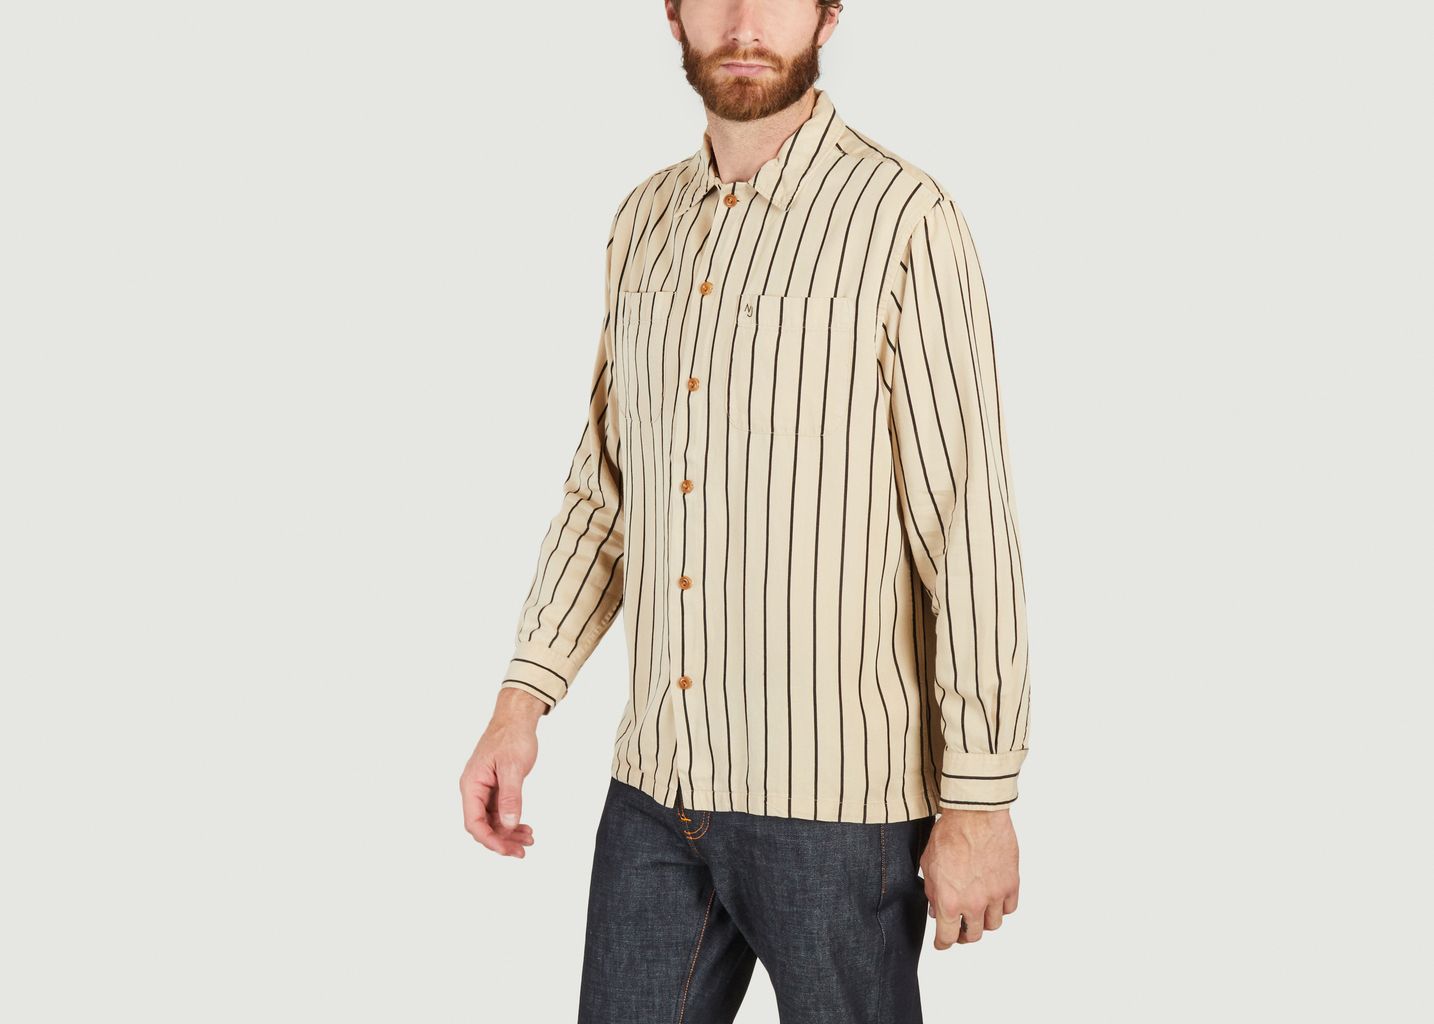  Vincent striped shirt  - Nudie Jeans